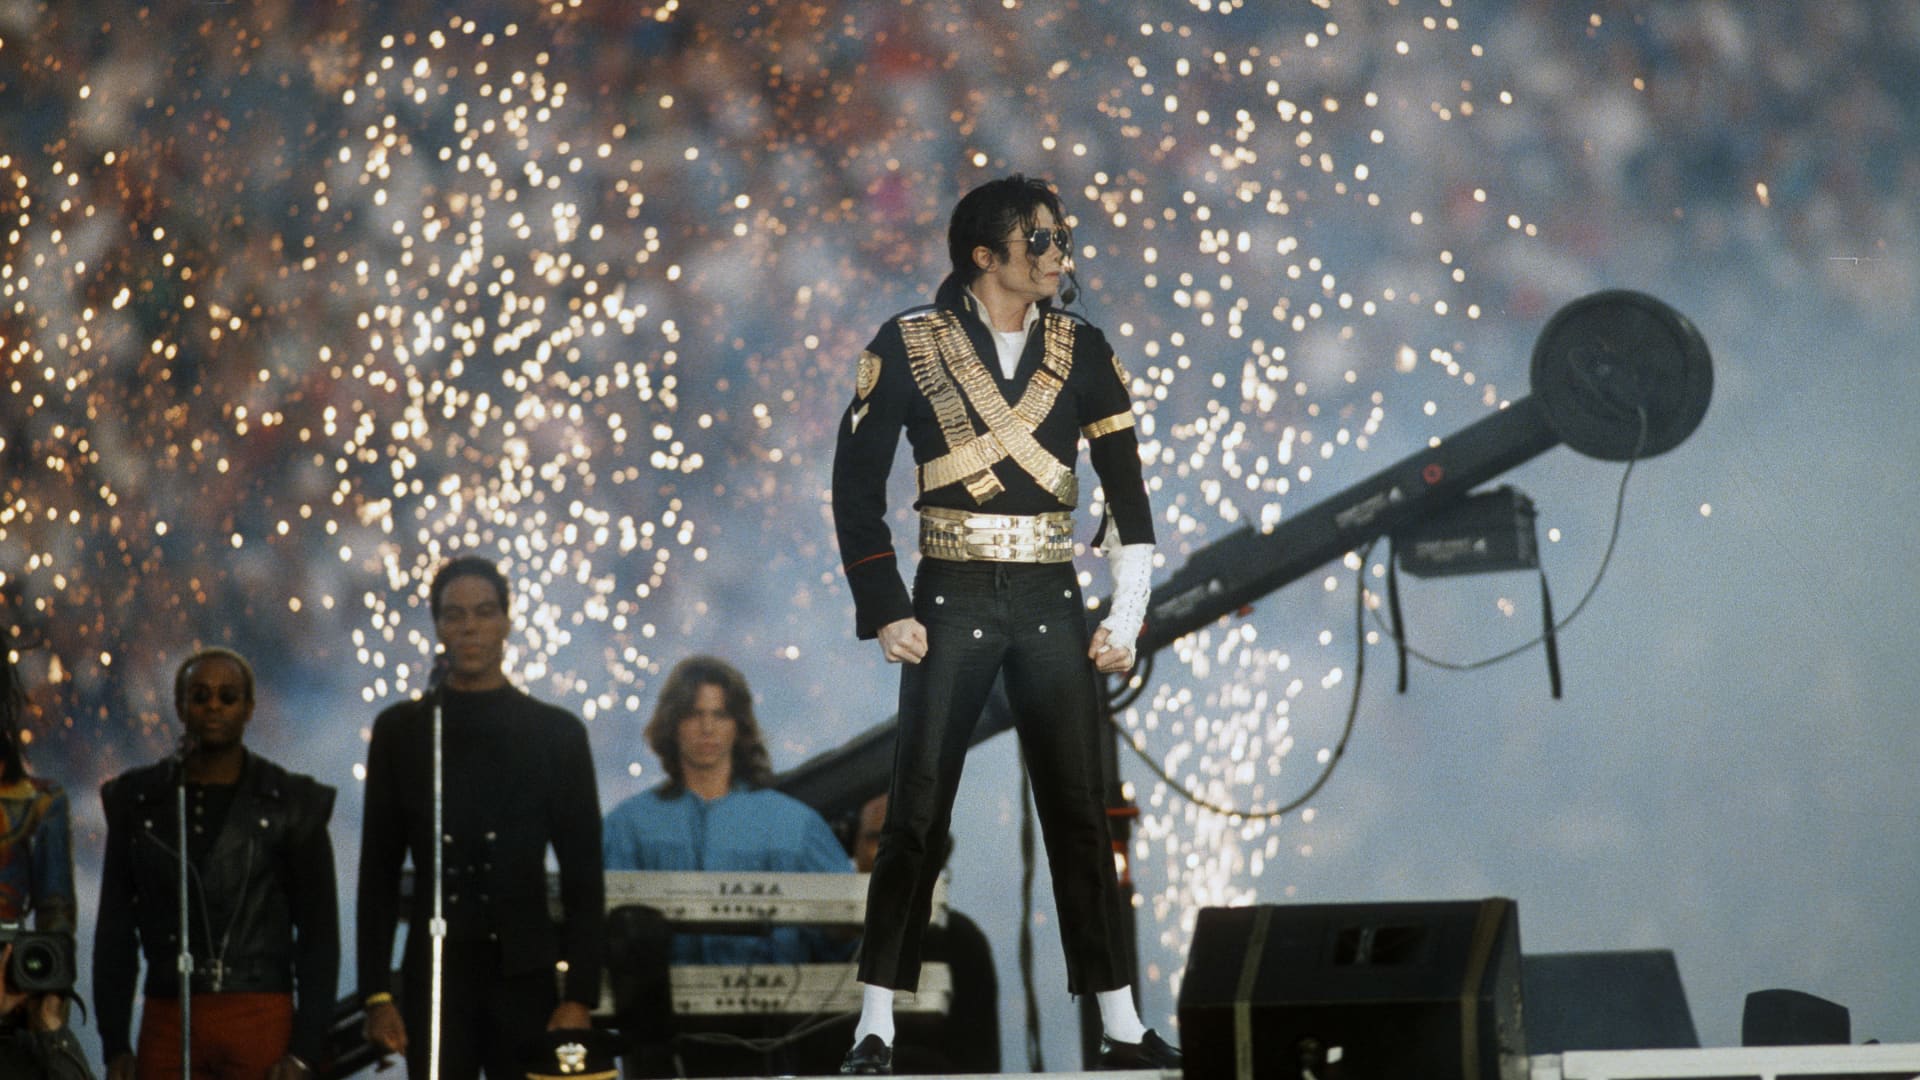 Pop singer Michael Jackson performs during the halftime show of Super Bowl XXVII between the Dallas Cowboys and Buffalo Bills on January 31, 1993 at The Rose Bowl in Pasadena, California.